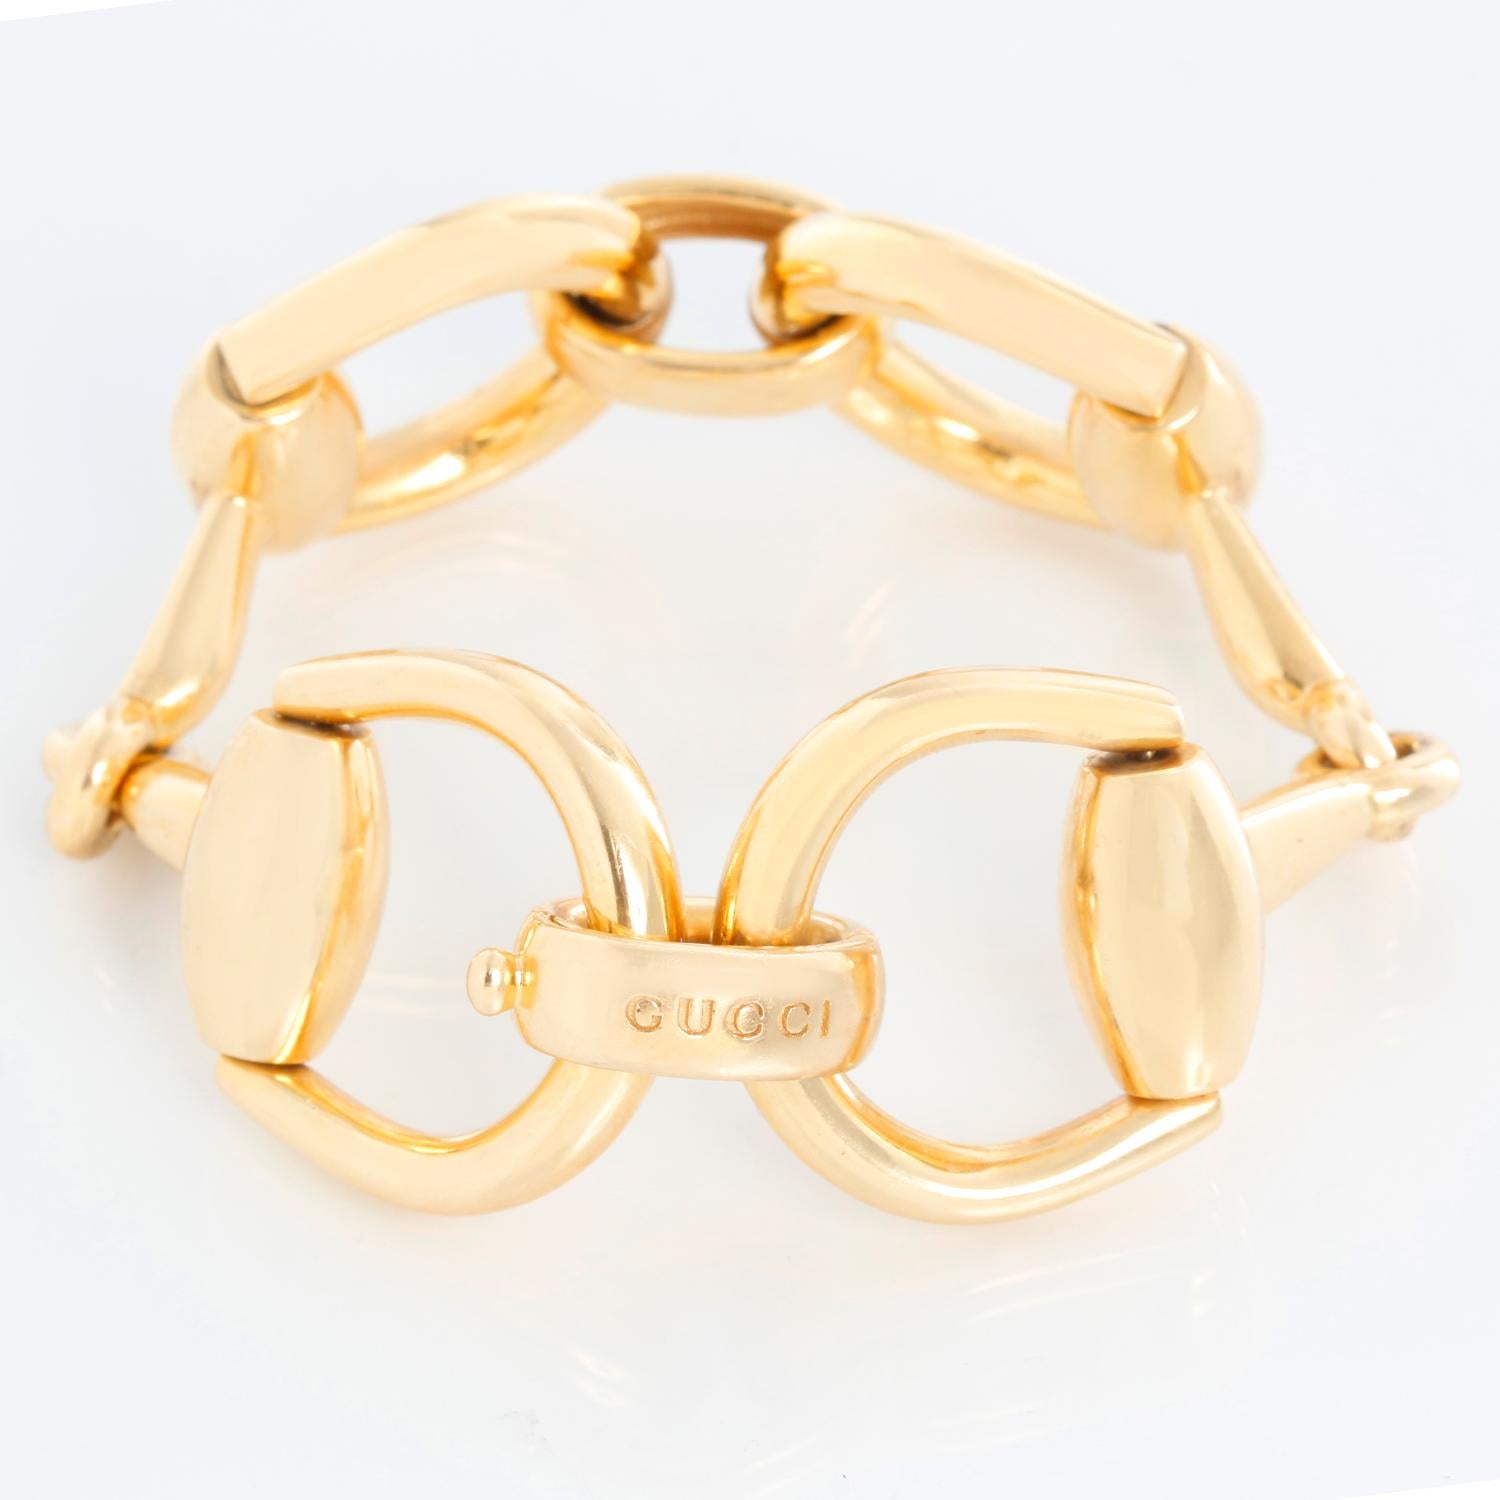 Gucci 18K Yellow Gold Horsebit Large Link Bracelet - 18k yellow gold Horsebit Large Link Bracelet by Gucci. Length 7.5 inches. Width 1 inch. Weight 53.7 grams. Hallmarks: Gucci Made in Italy 750 16. Pre-owned with custom box . 